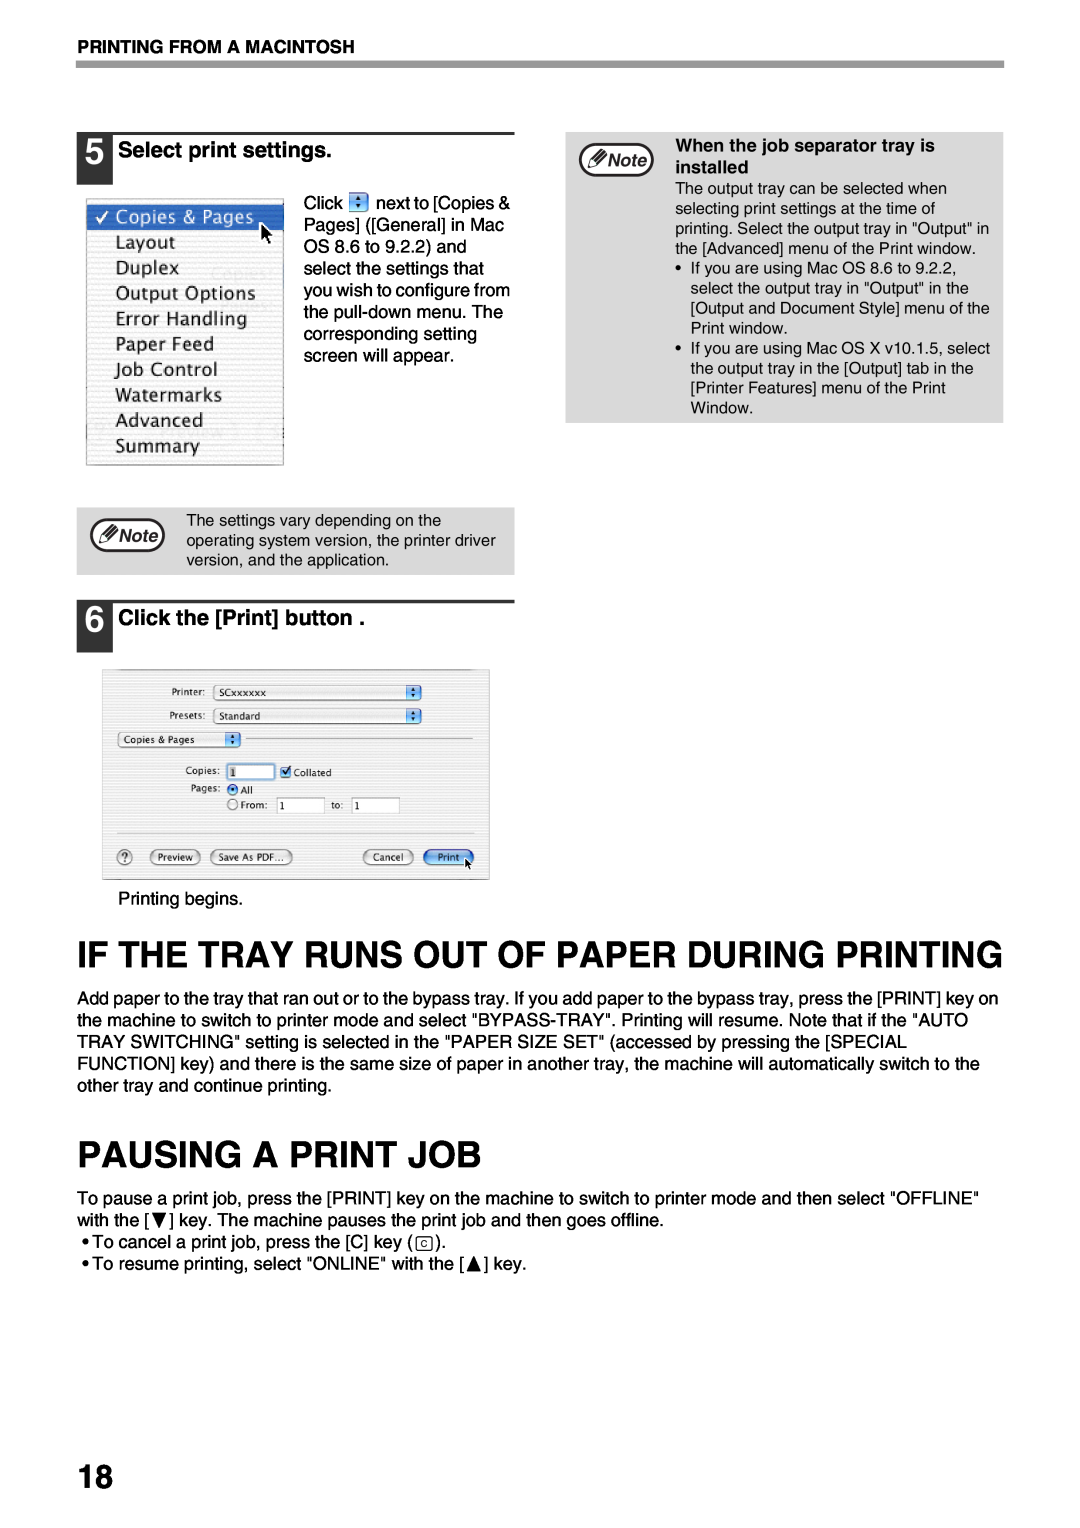 Sharp AR-NB3 operation manual Select print settings, Click the Print button, If The Tray Runs Out Of Paper During Printing 